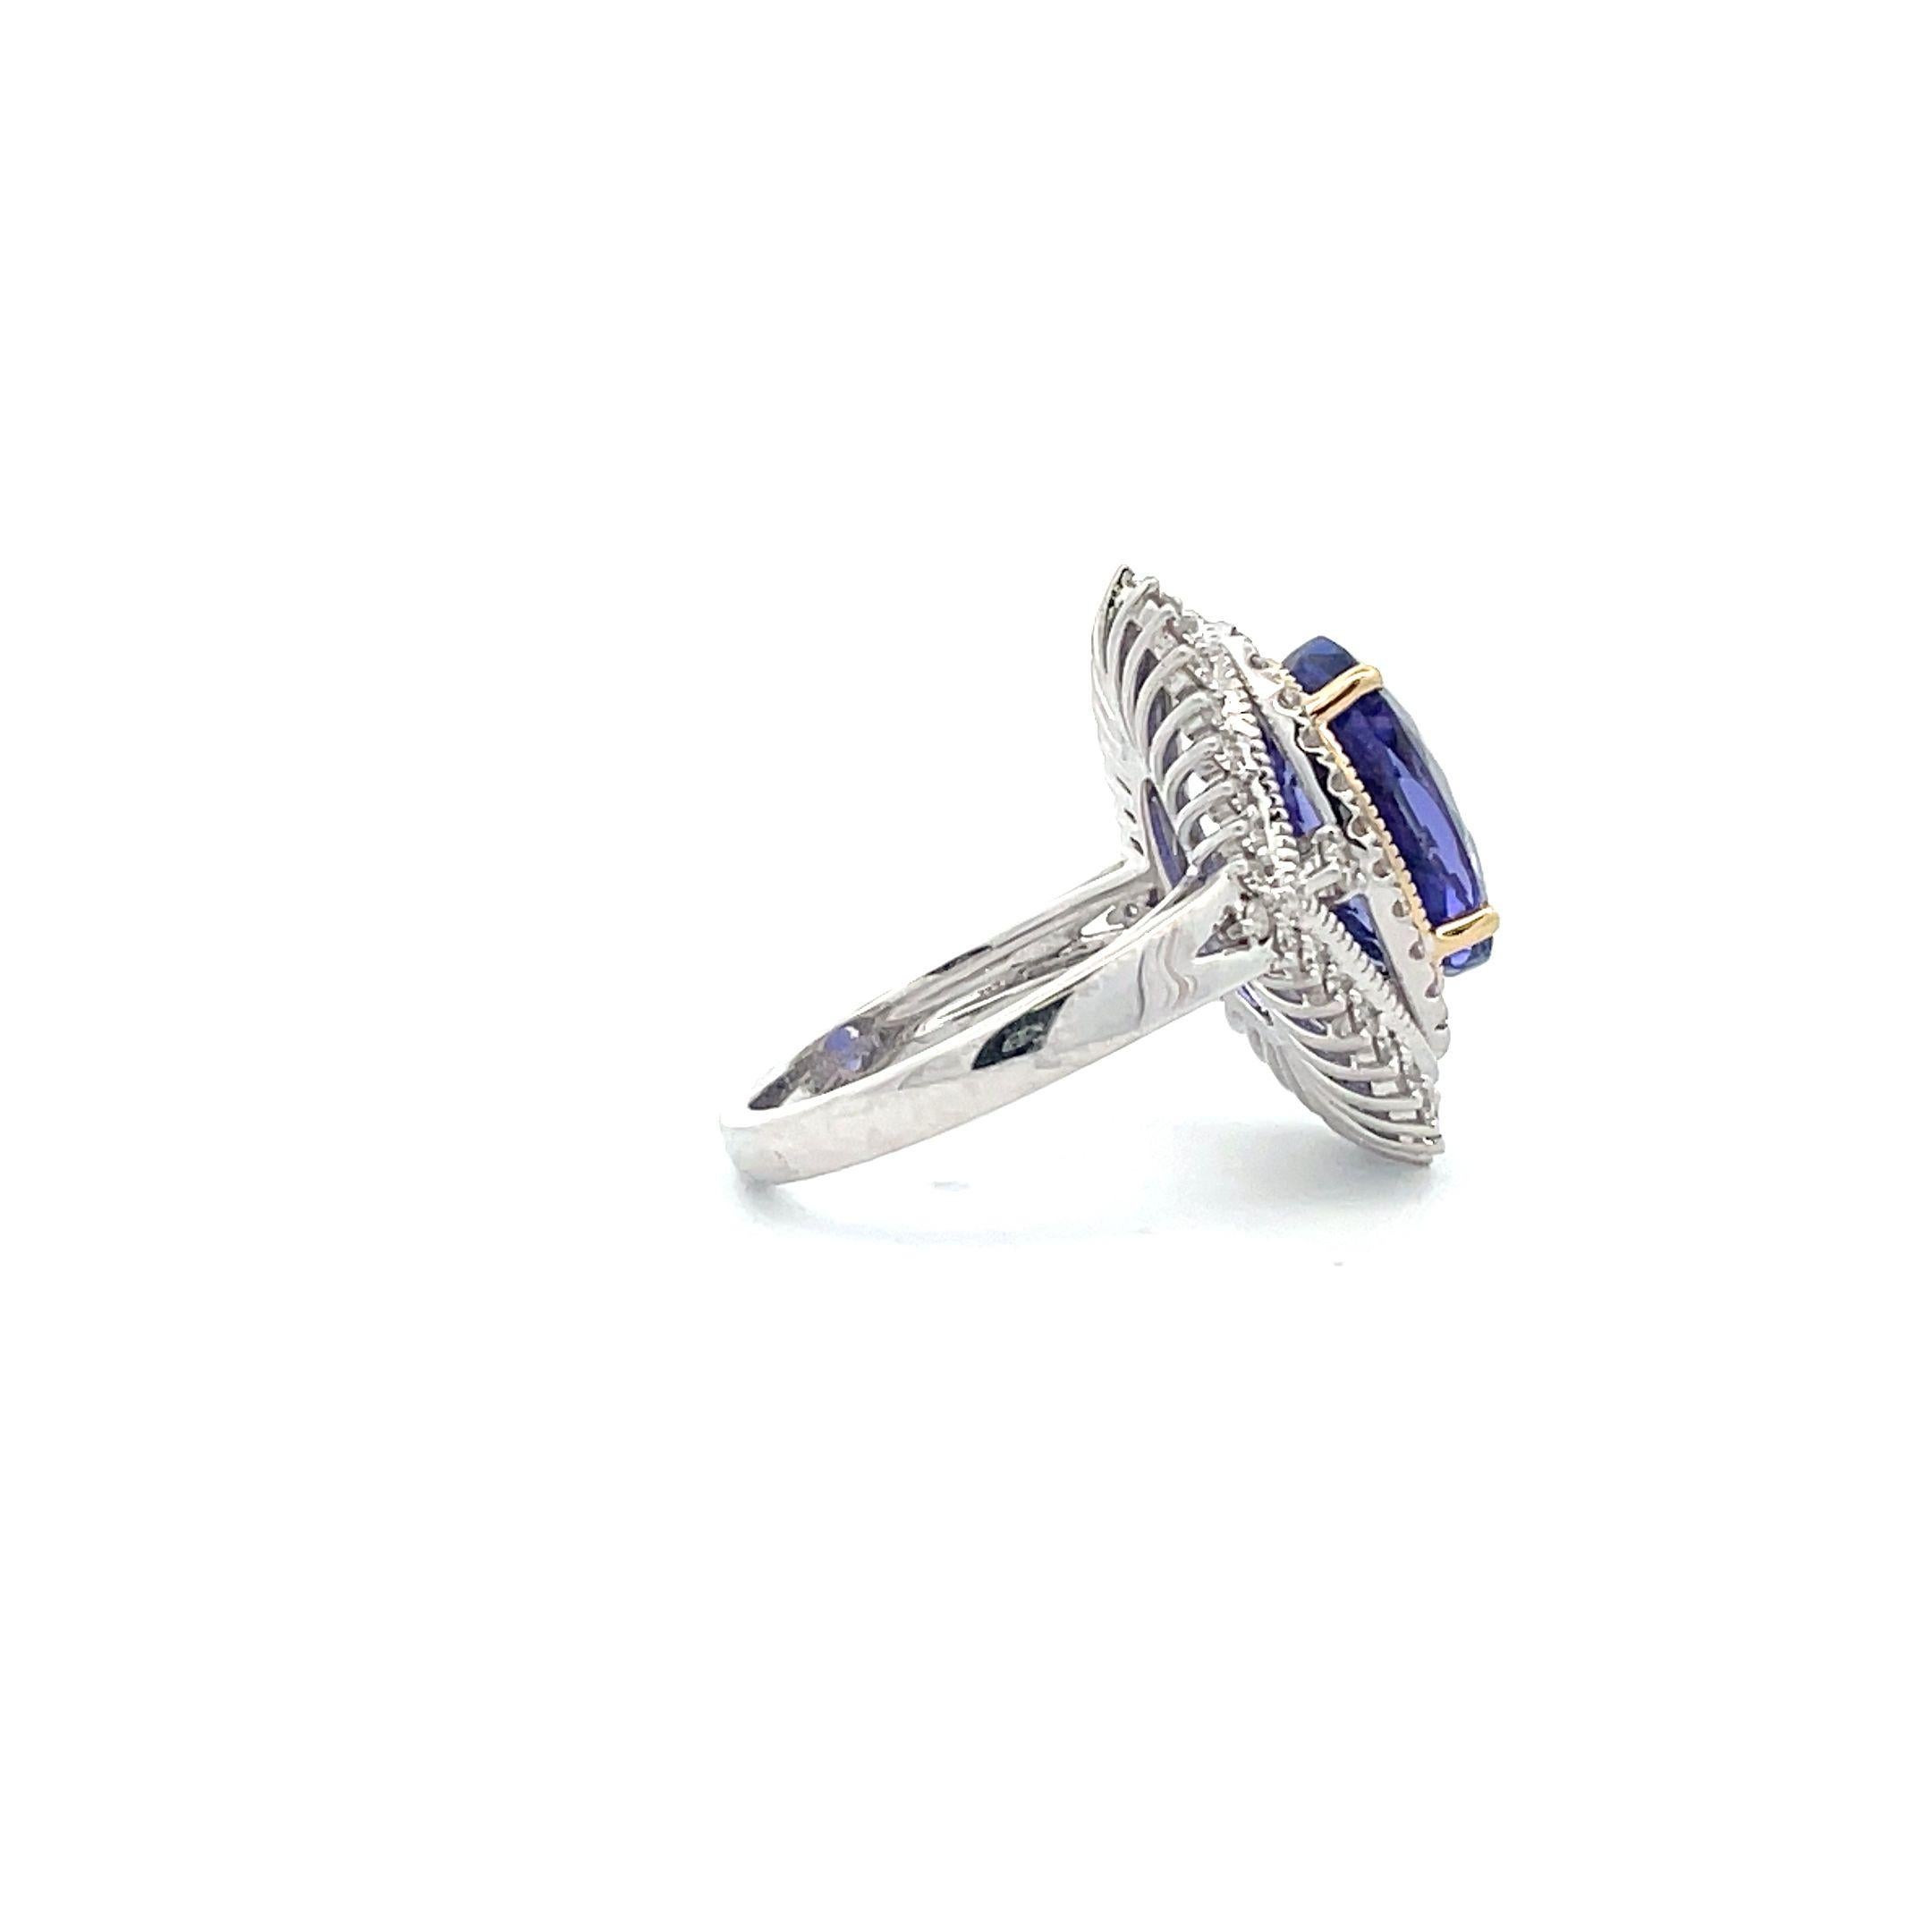 This gorgeous Edwardian-inspired ring is crafted from 6.80 carats of natural Tanzanite, paved, and surrounded by a halo of 64 round diamonds. The setting is meticulously hand-crafted in platinum base metal and finished with 14K White Gold and Yellow